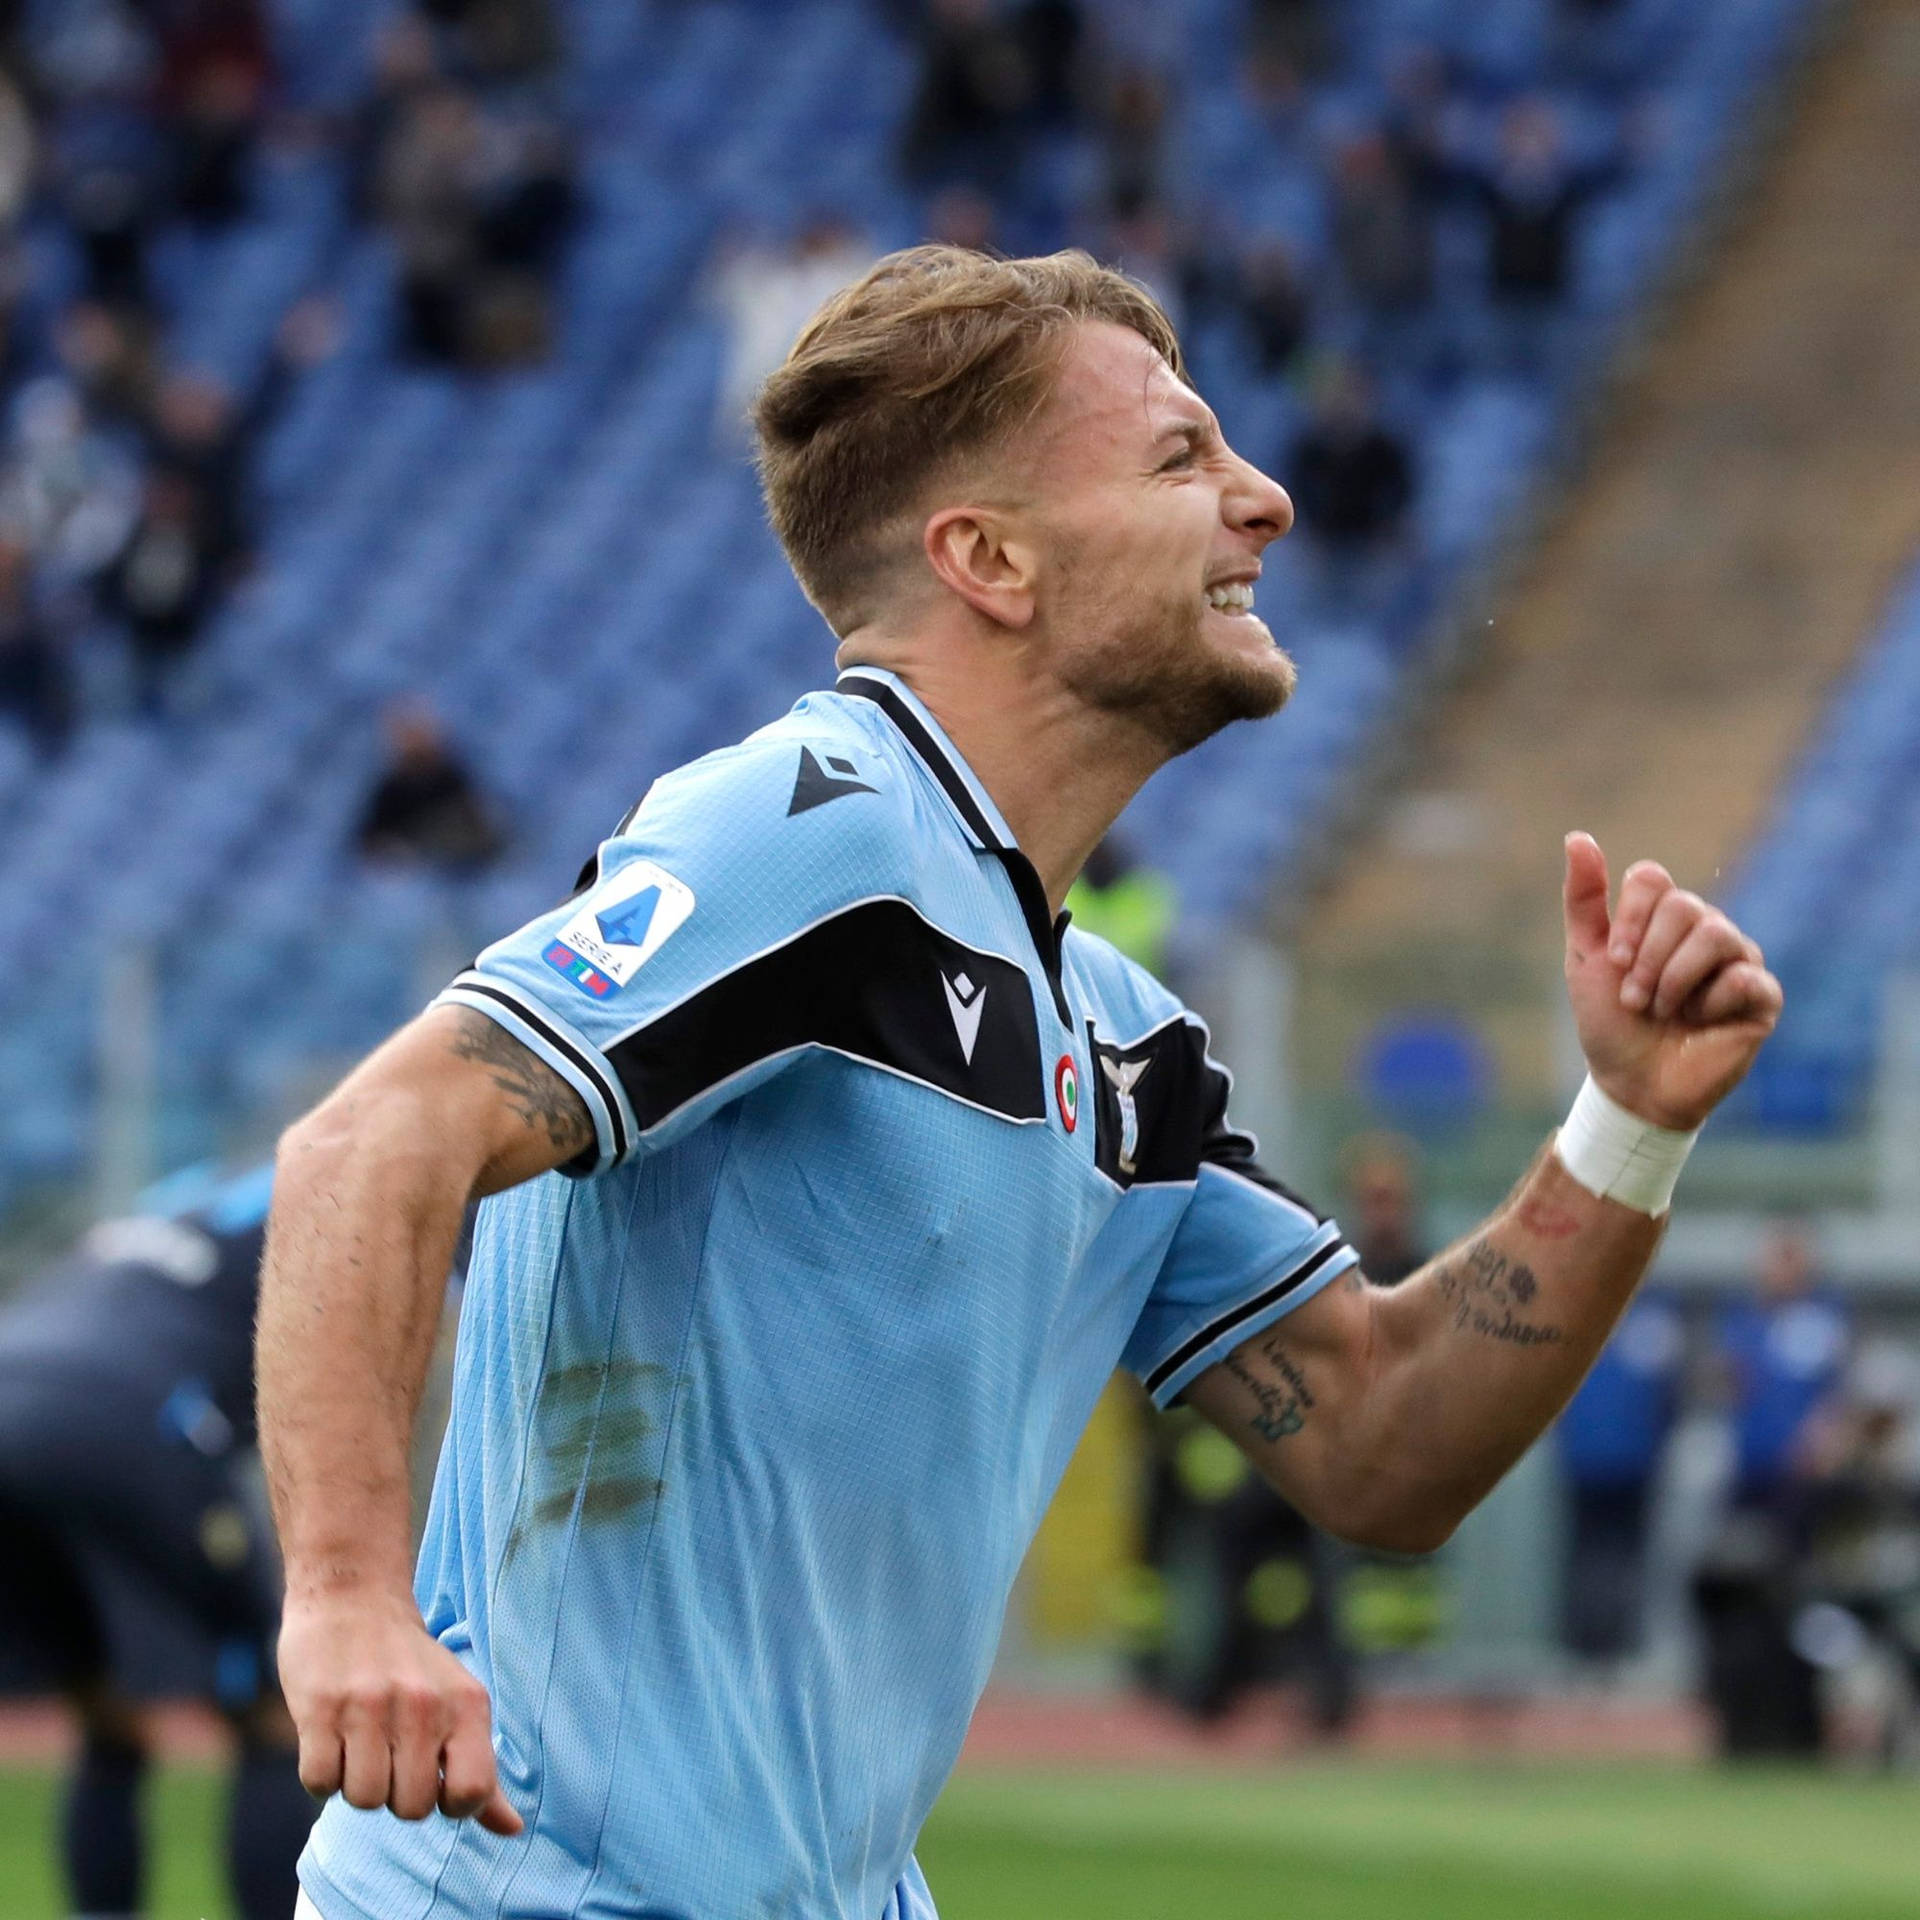 Ciro Immobile Running With Smile